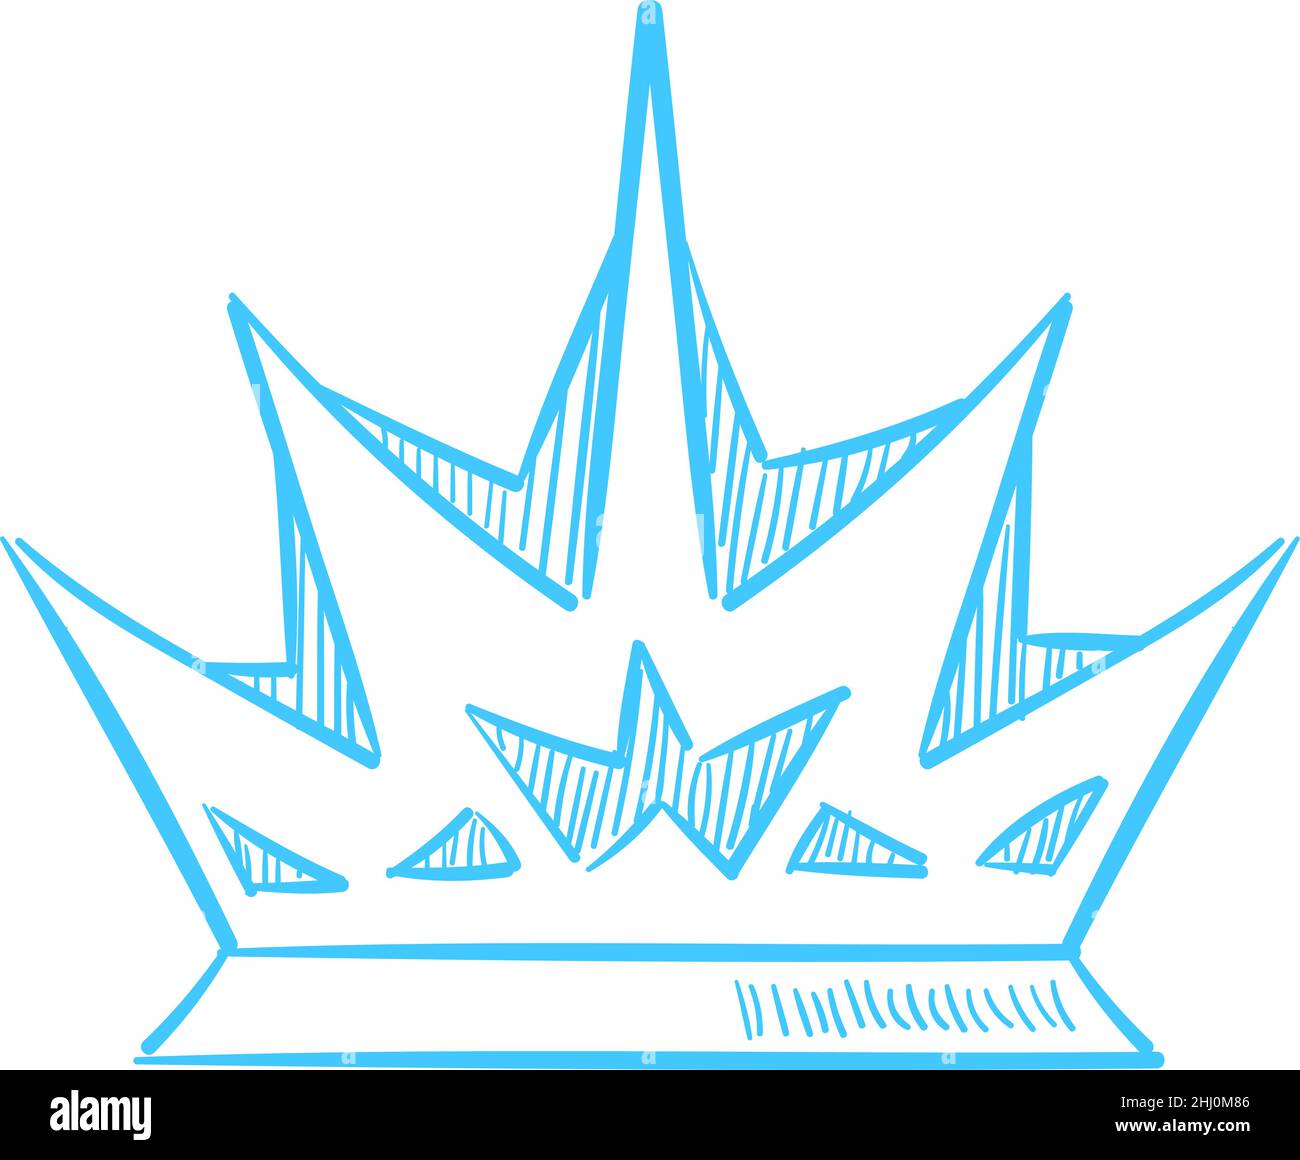 Ice crown. Noble power symbol. Royalty sign Stock Vector